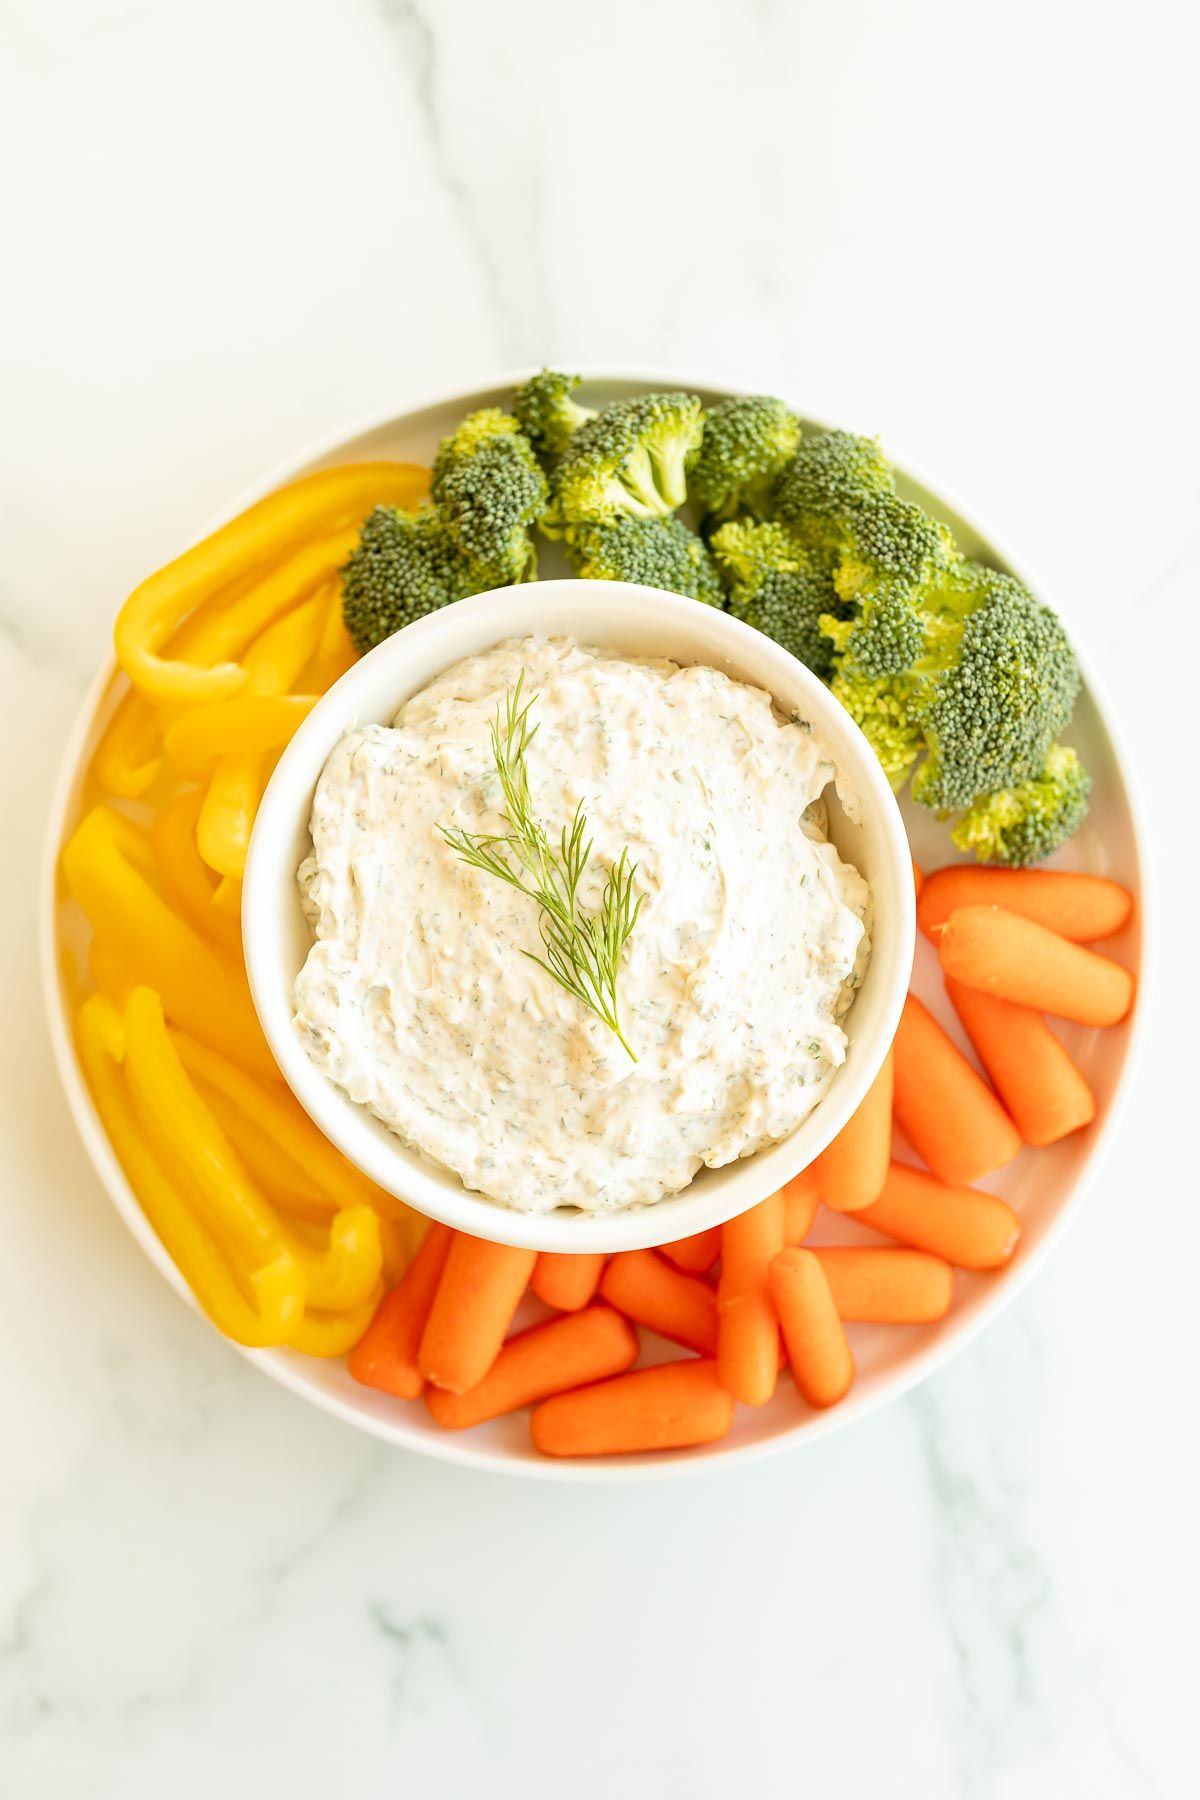 A white bowl full of a dill dip recipe surrounded by vegetables.